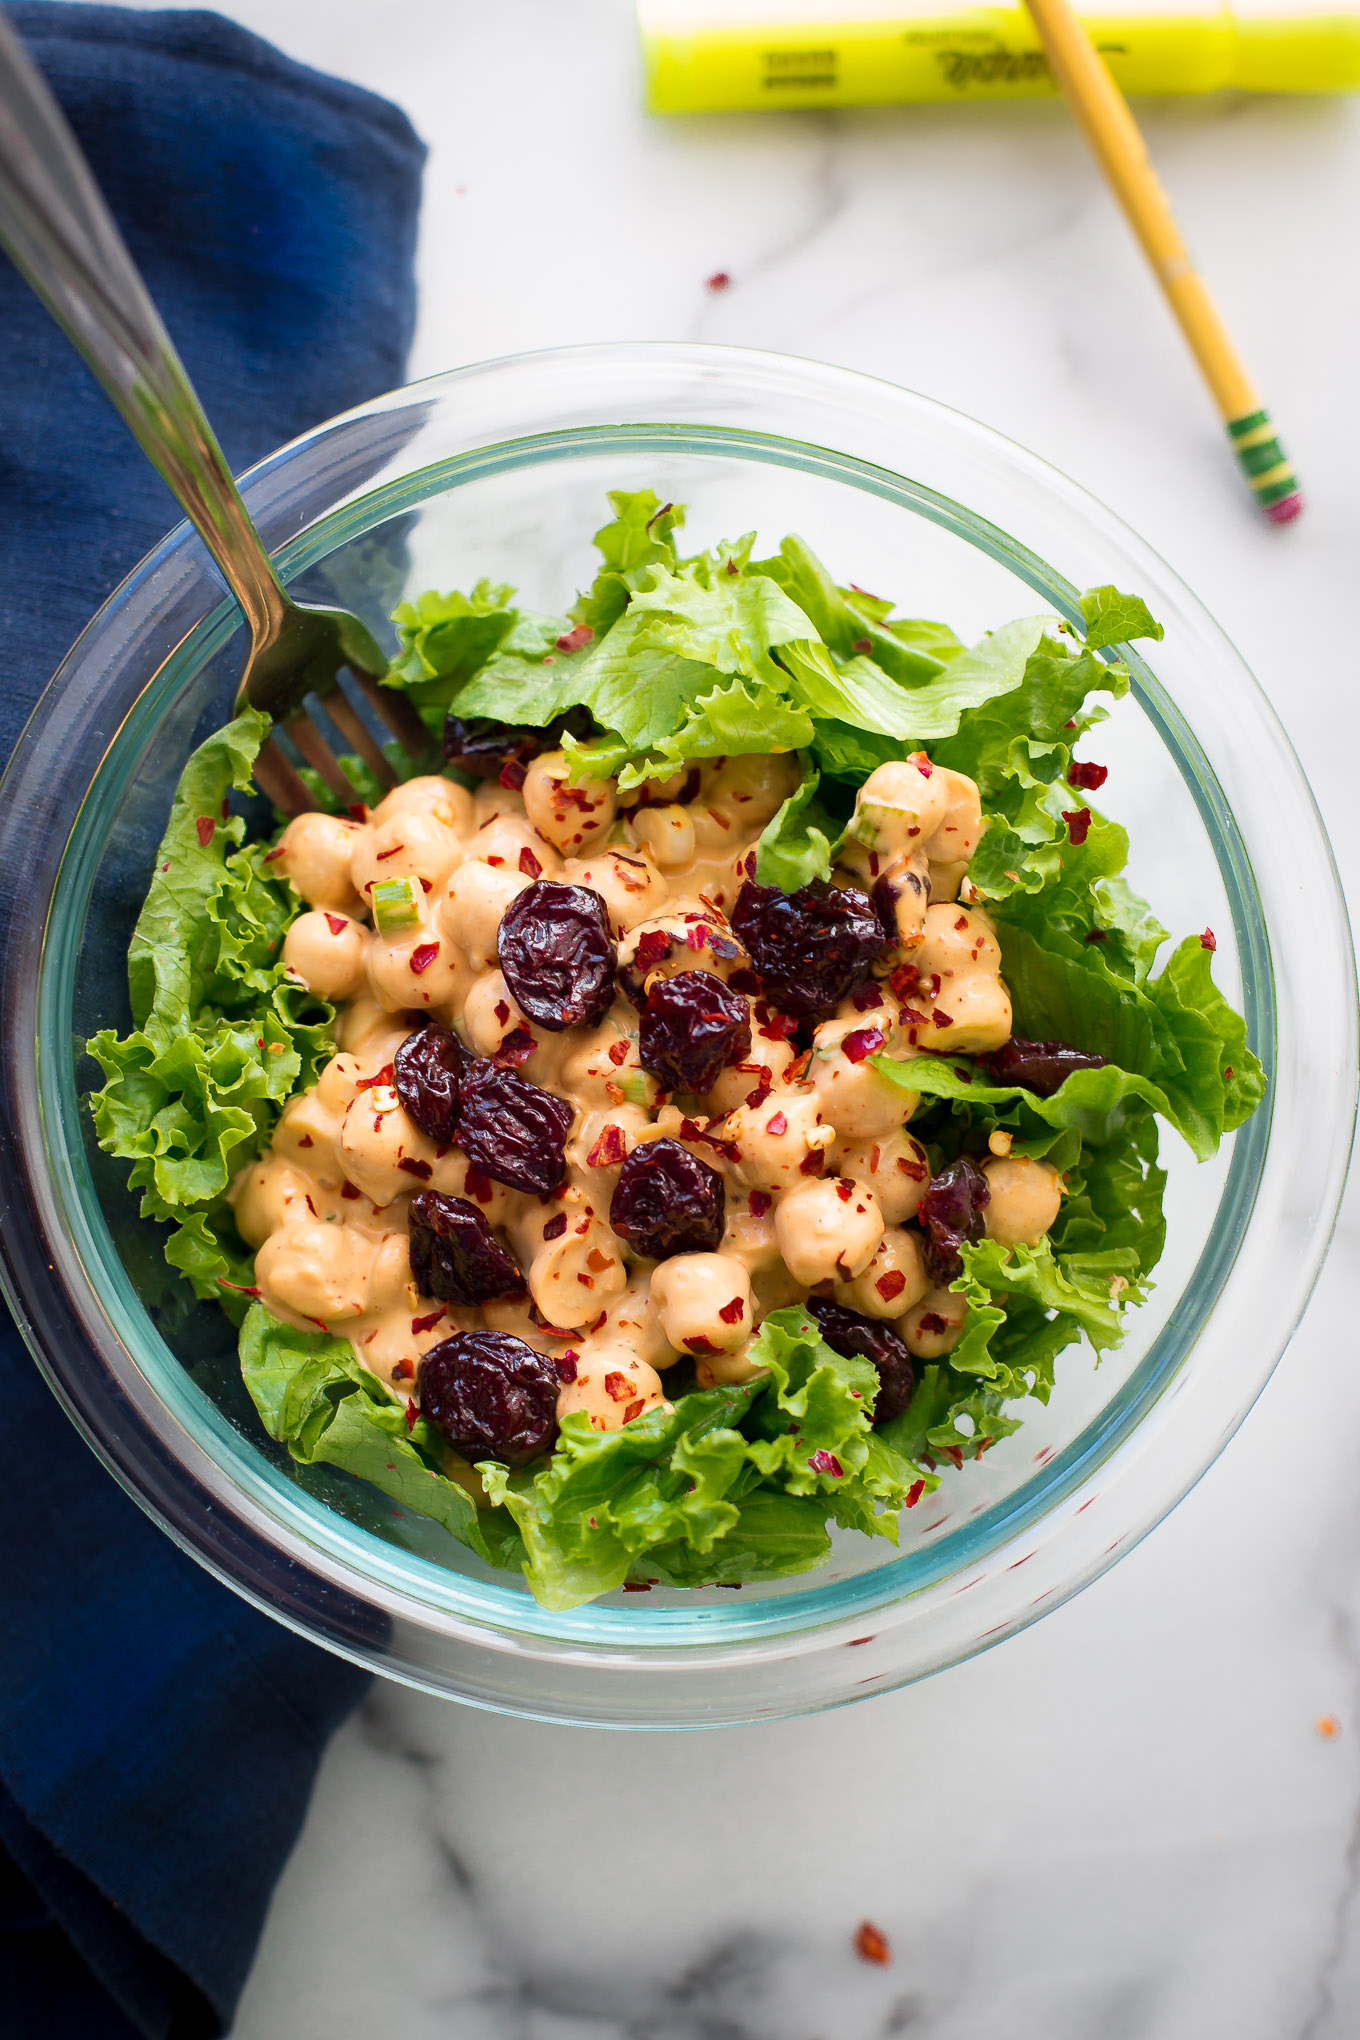 Healthy chipotle chickpea salad. Made with delicious real food with only 5 ingredients. Chickpeas, green onions, chipotle vegenaise, red pepper flakes, dried cherries and sea salt. Vegan. tasteofyummy.com